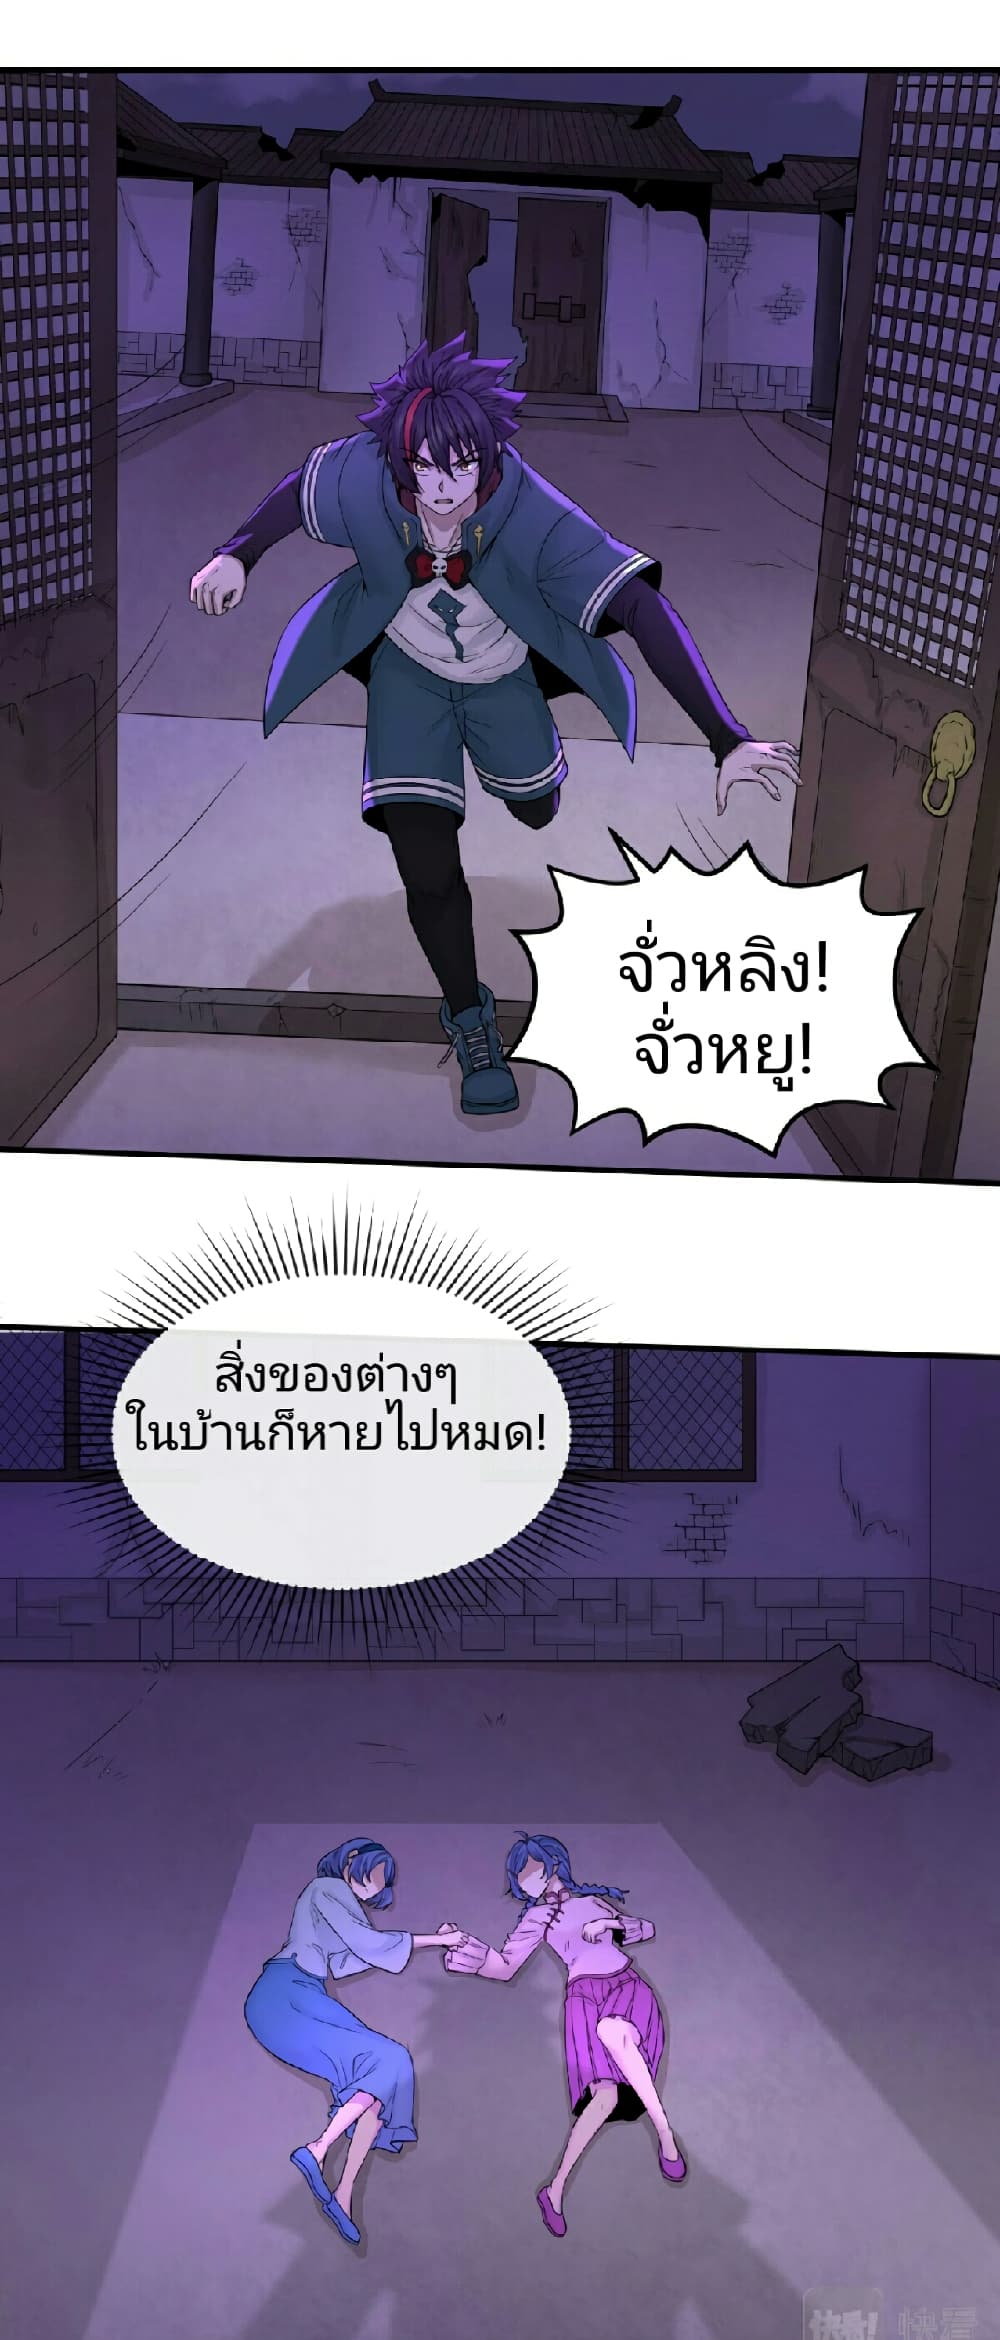 The Age of Ghost Spirits à¸à¸­à¸à¸à¸µà¹ 48 (4)